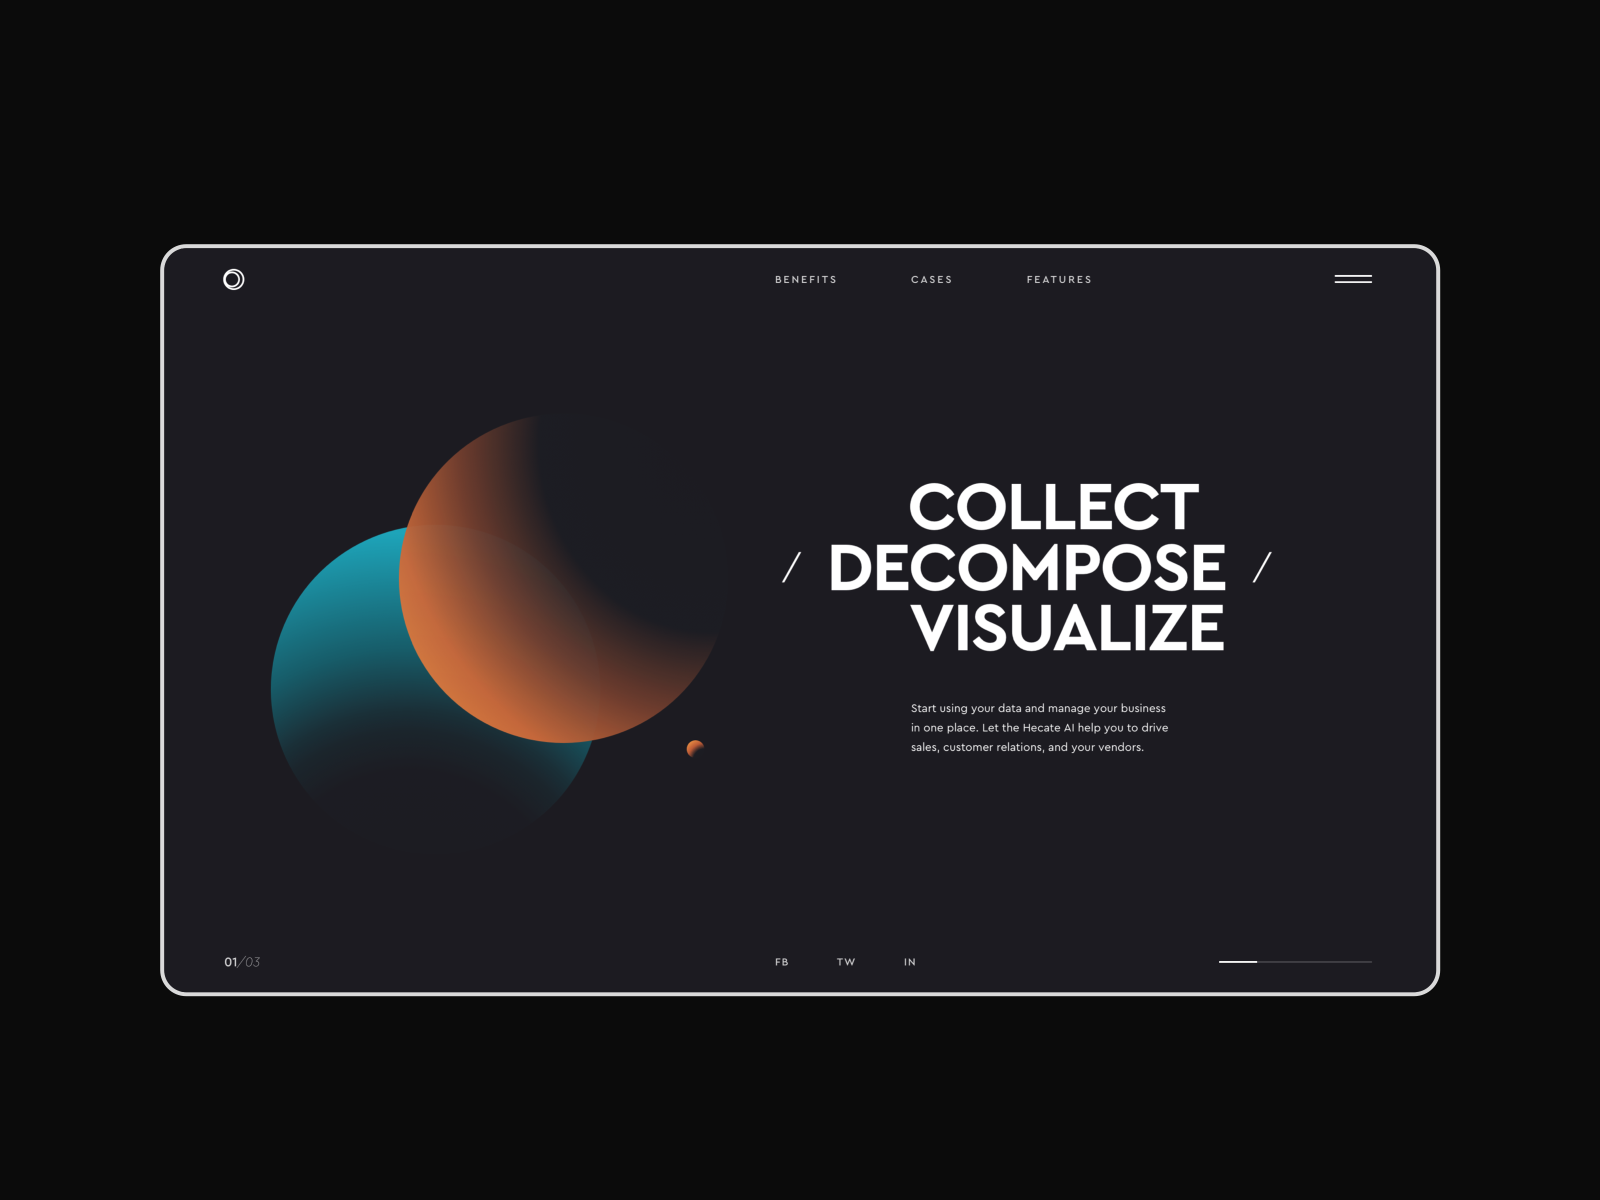 collect and visualize by bn digital on Dribbble